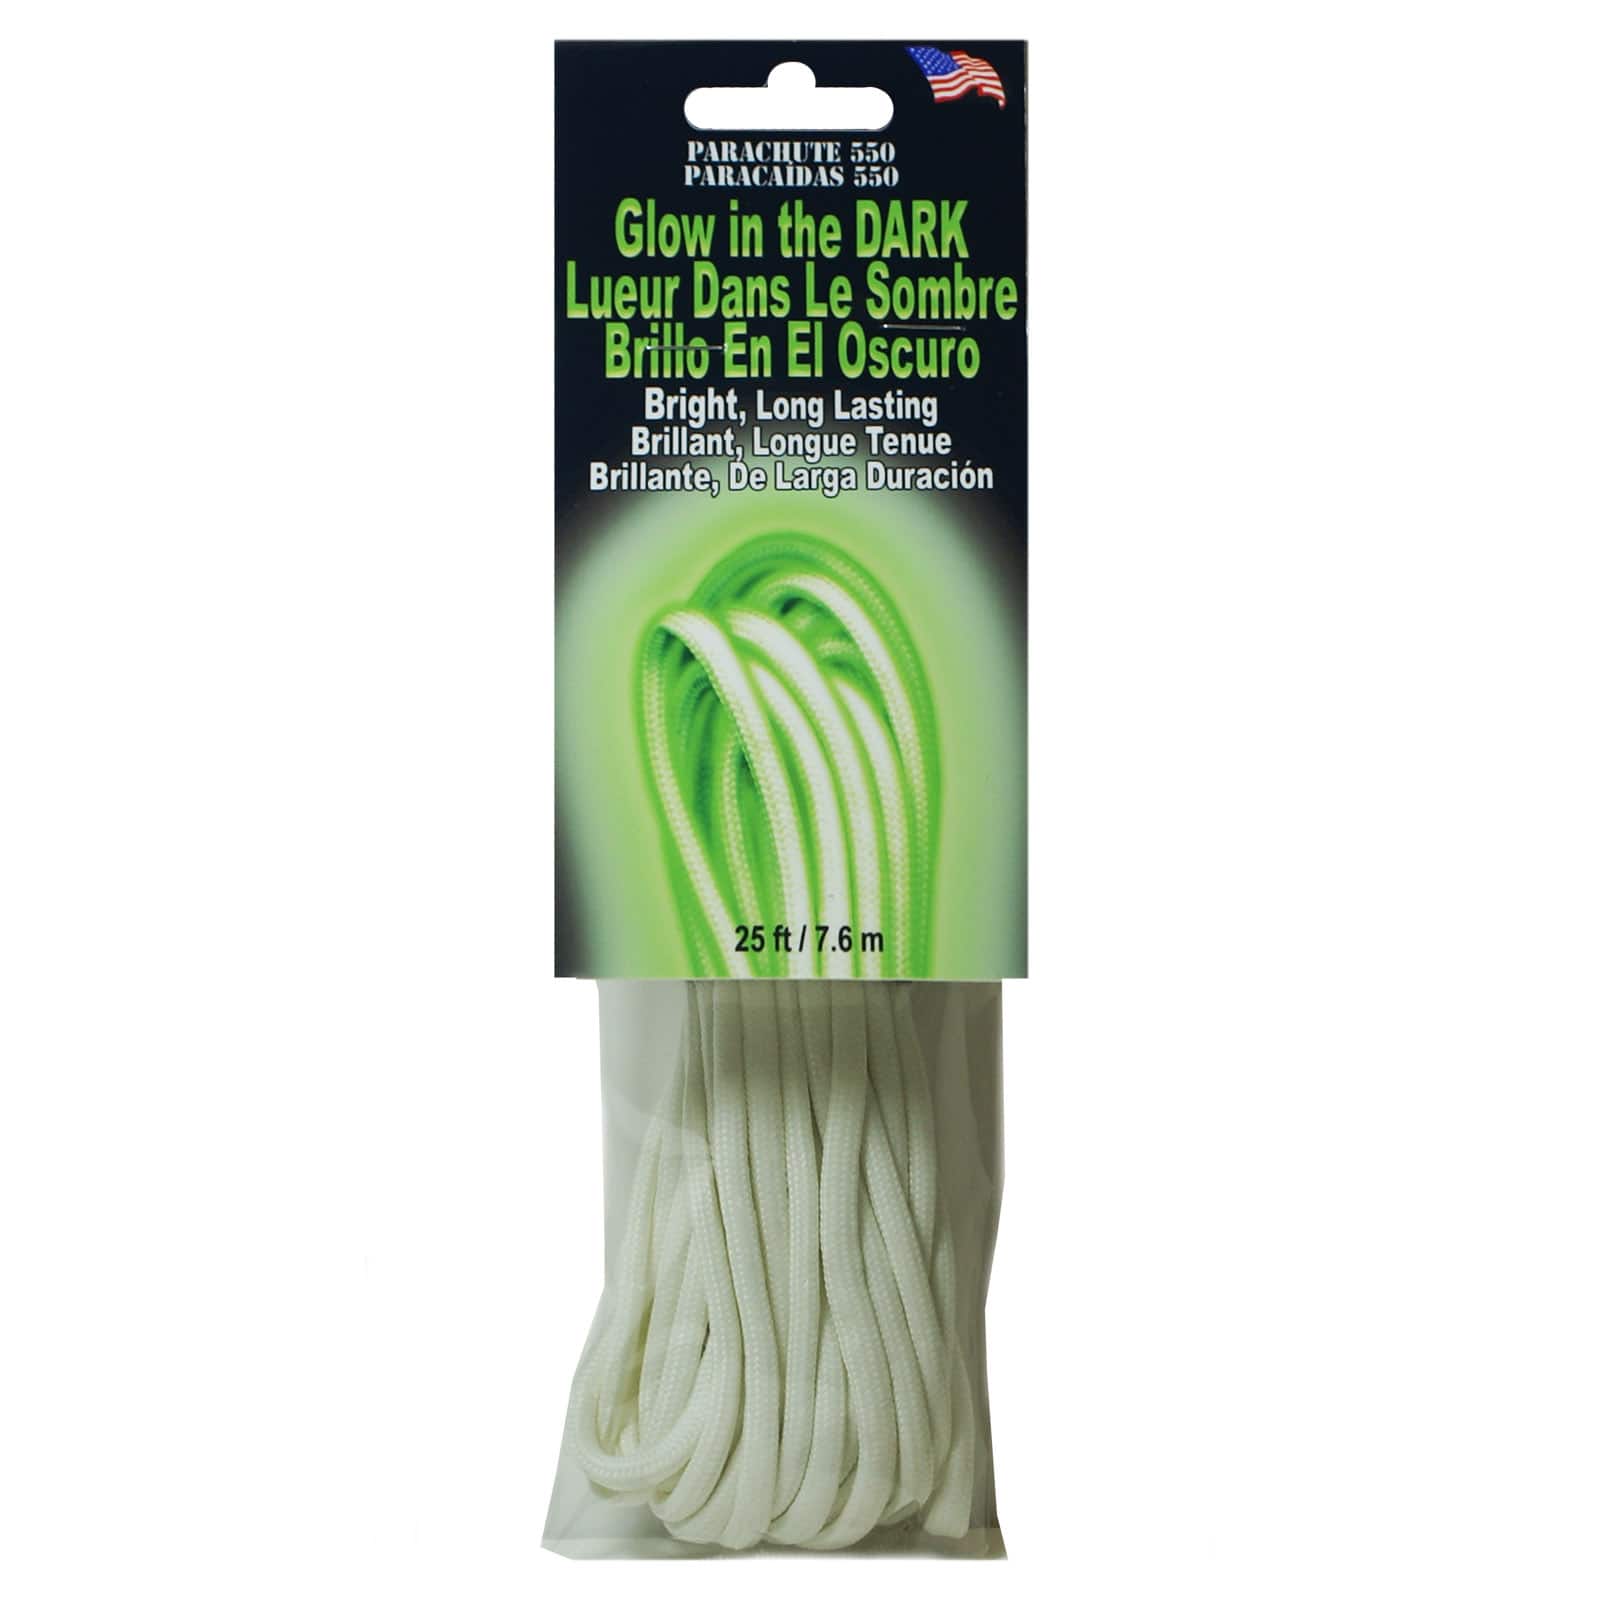 Pepperell 550 Parachute Cord, Glow In The Dark